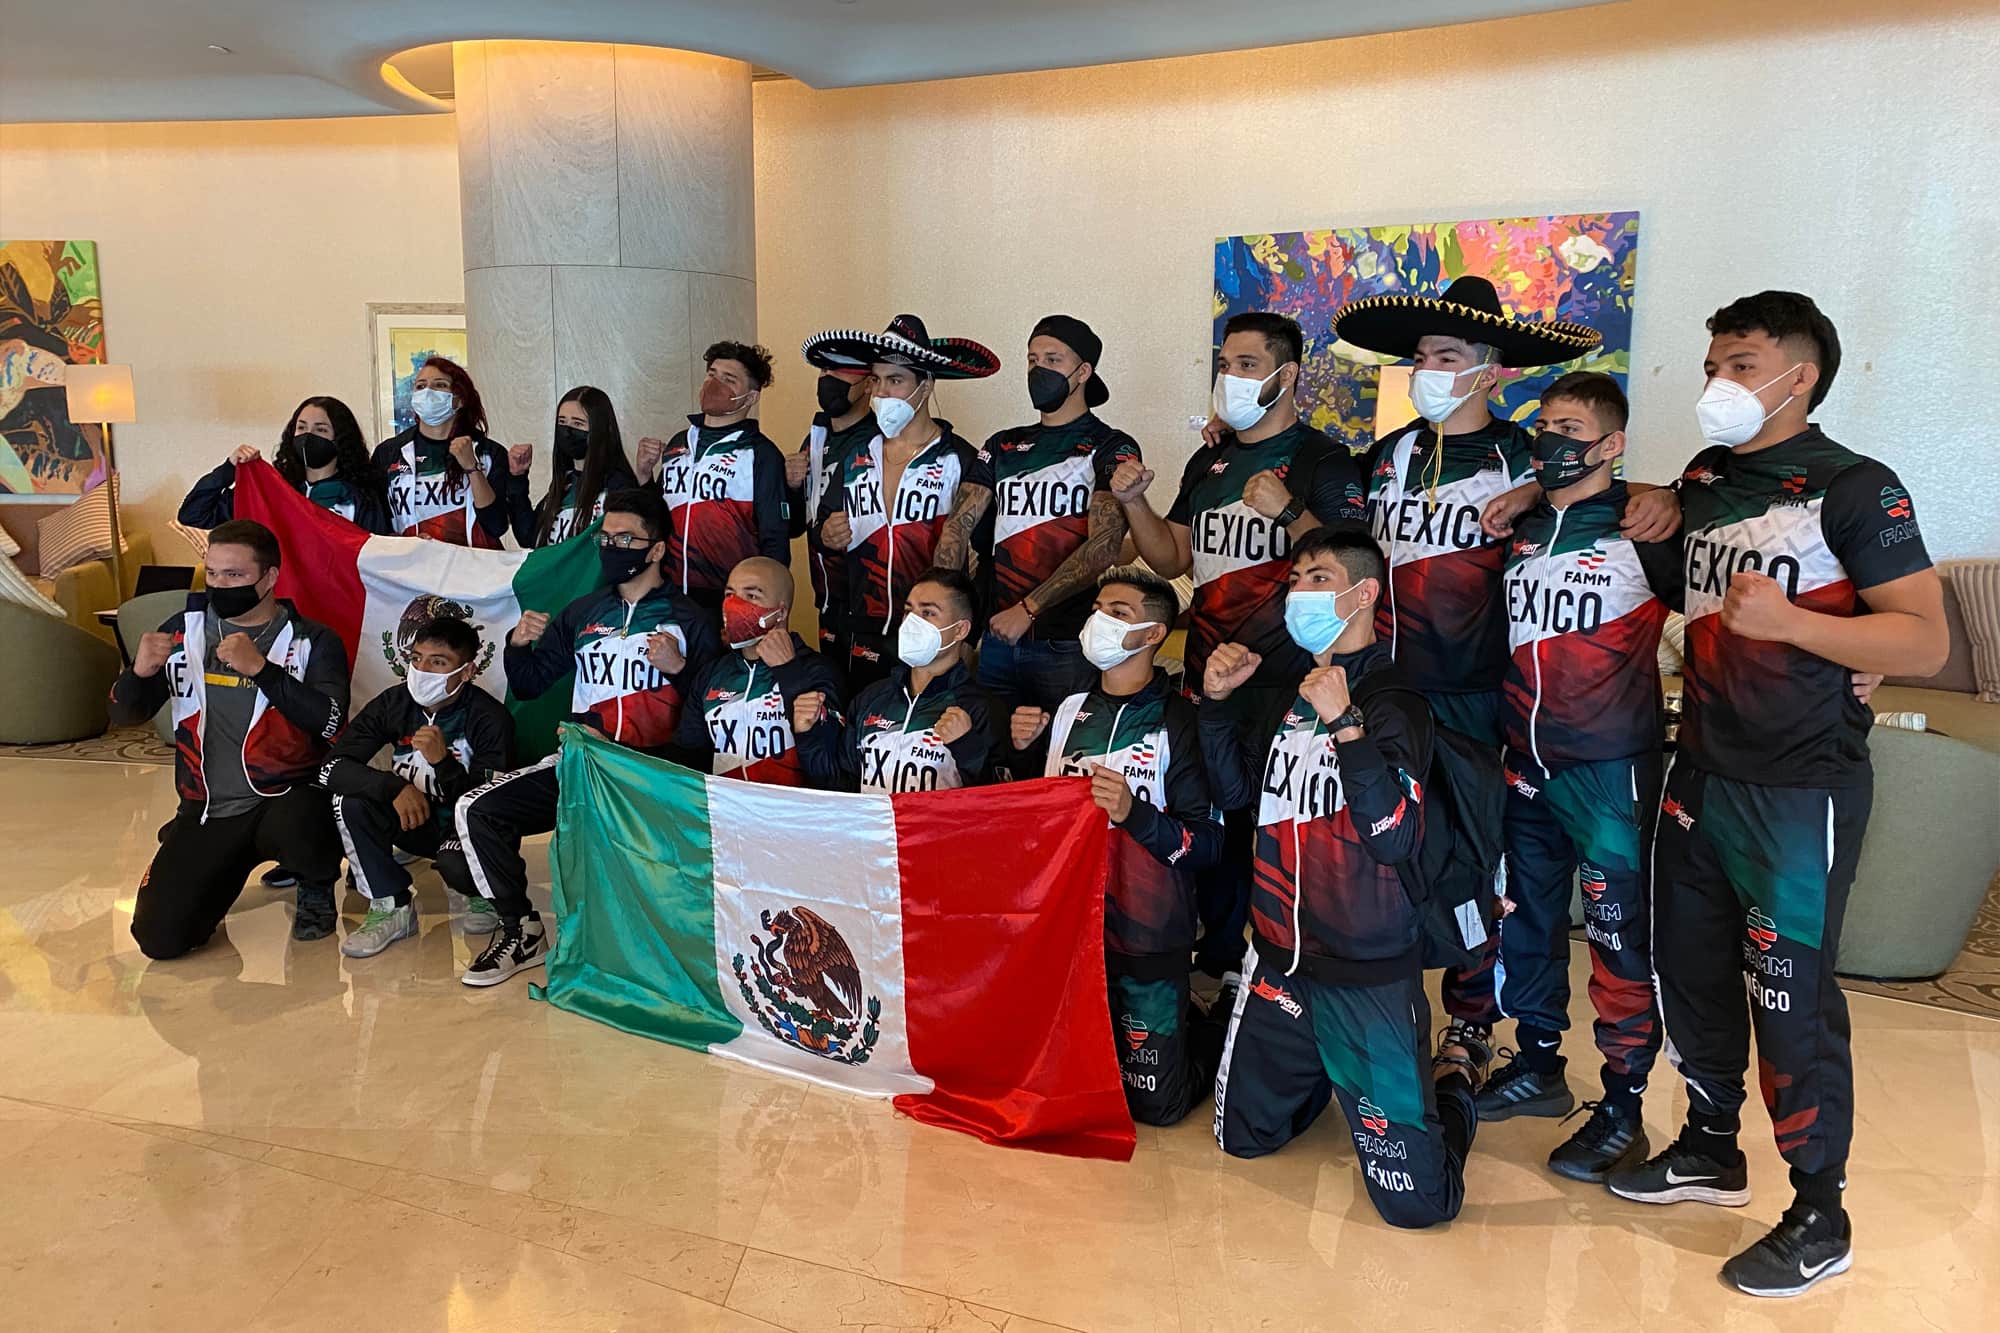 After long and winding road to Abu Dhabi, Team Mexico brings the passion to 2021 IMMAF World Championships